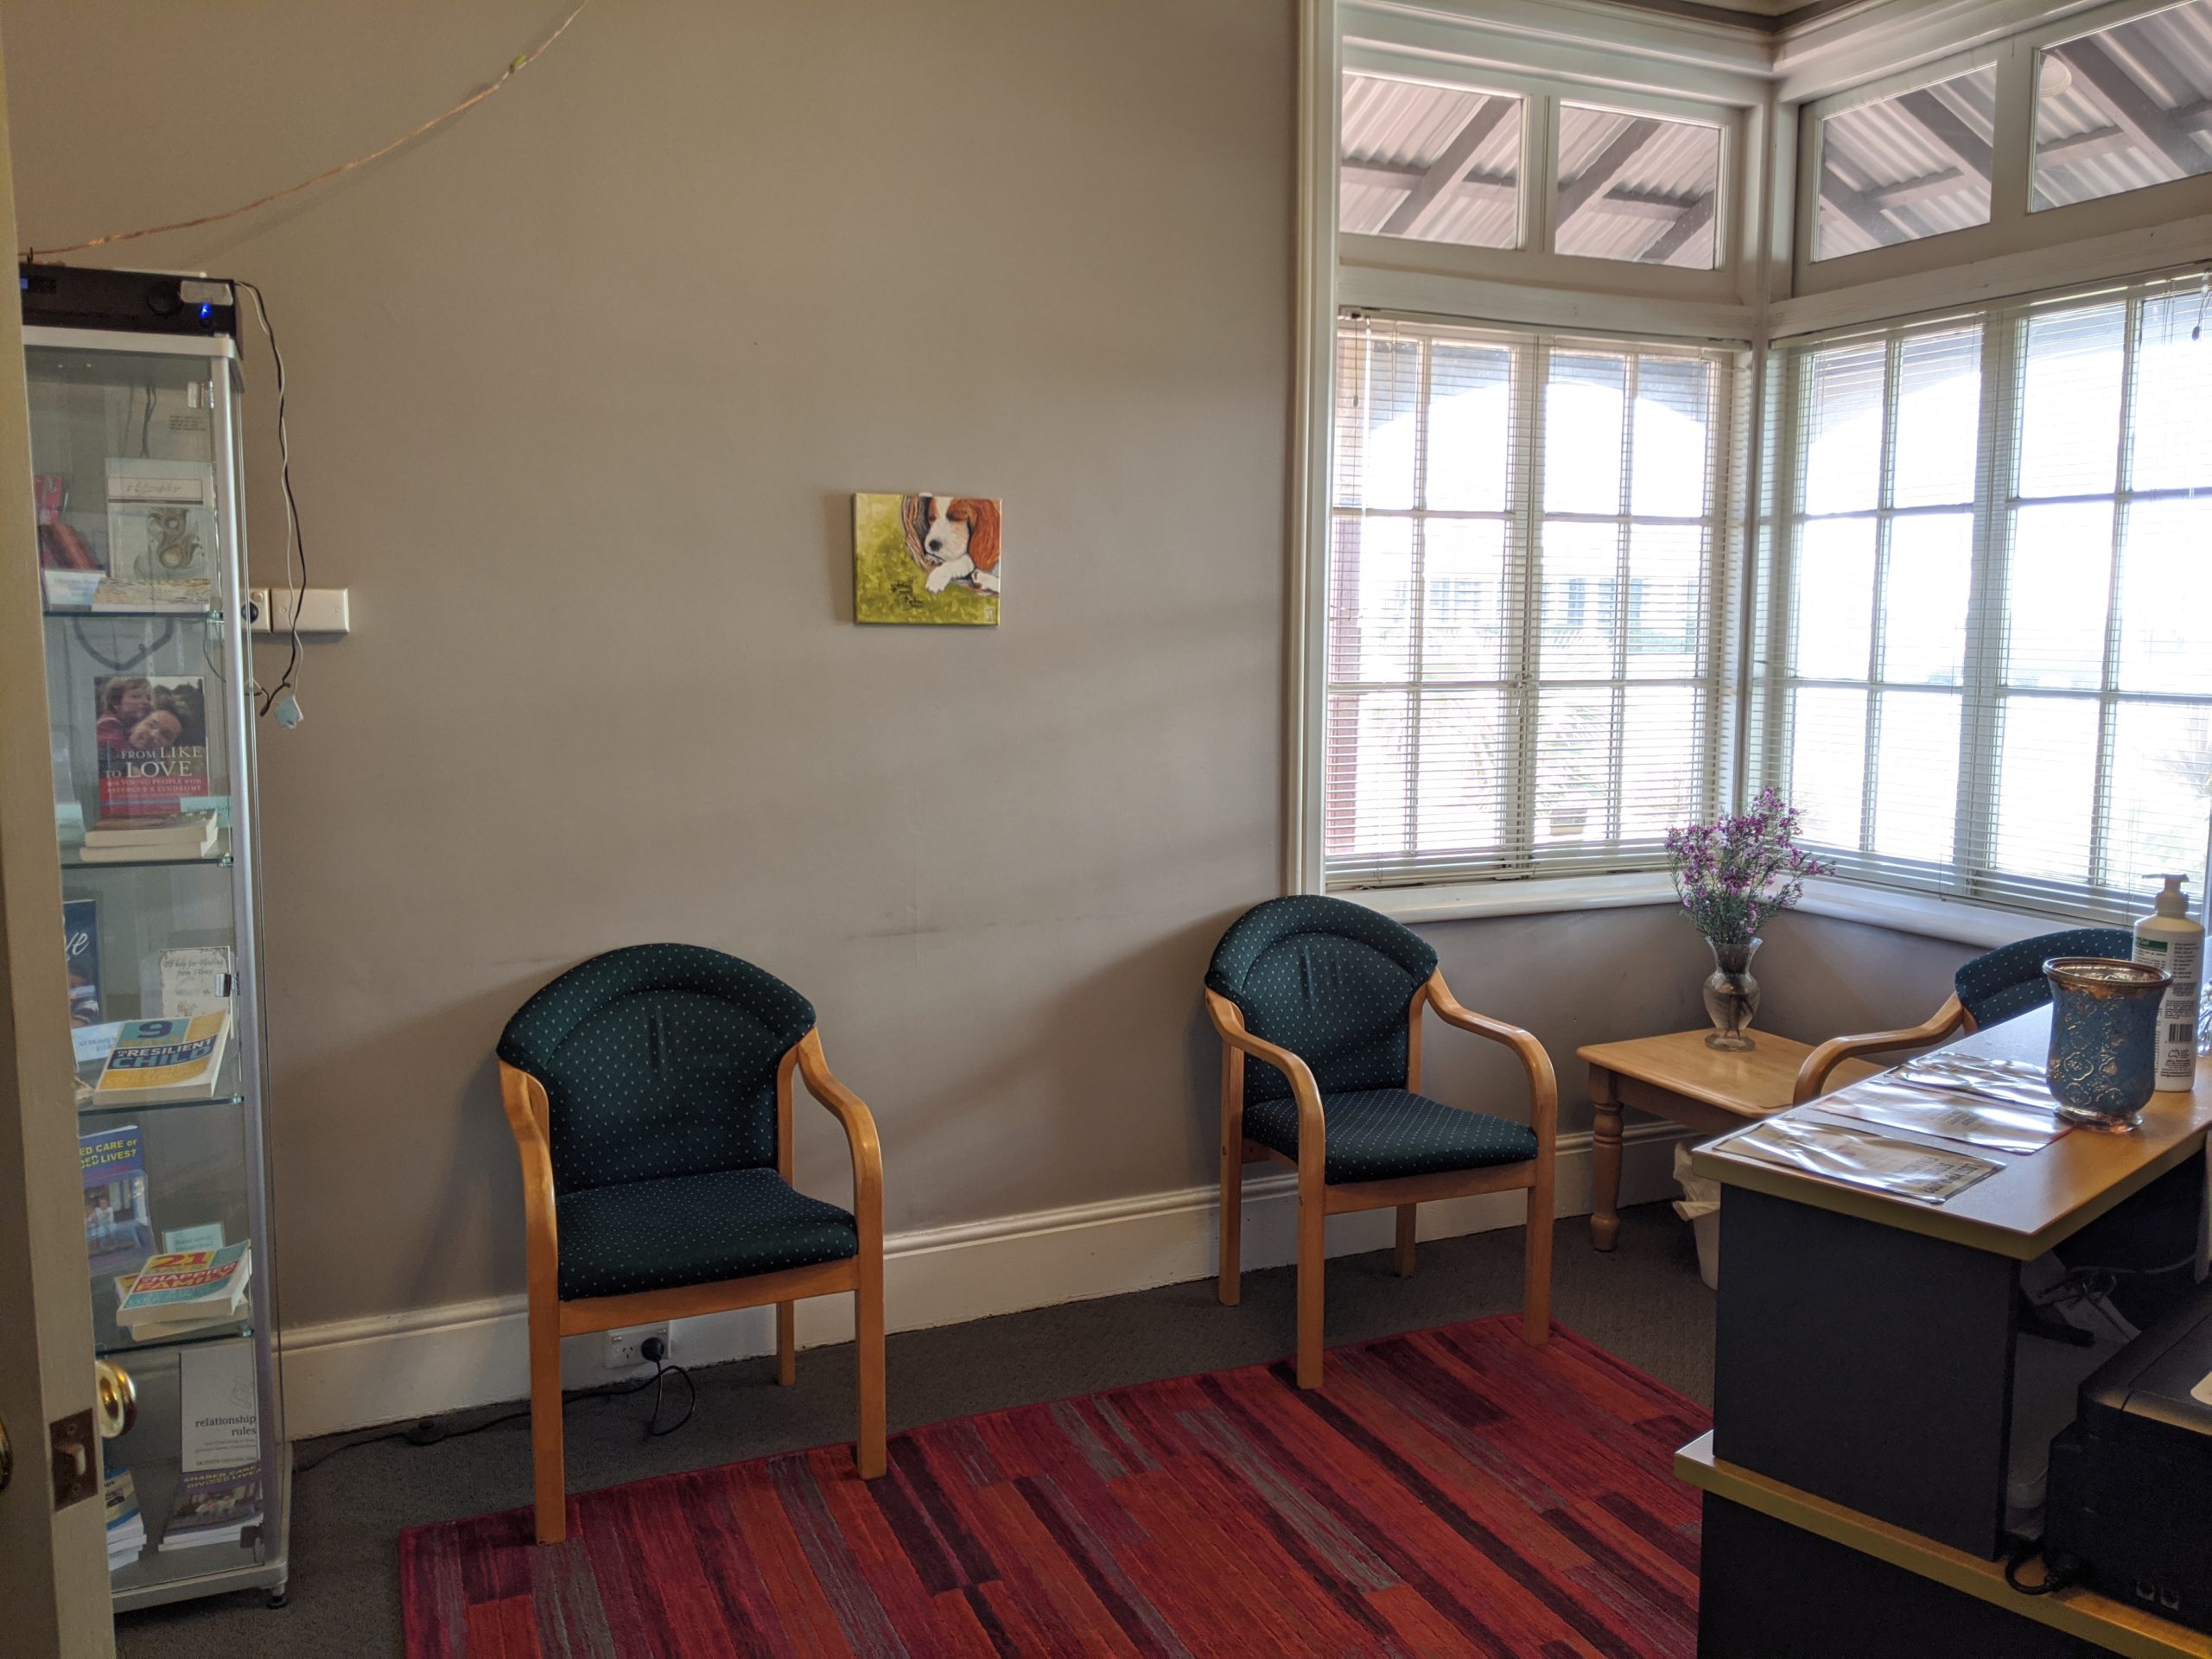 Photo of the waiting room